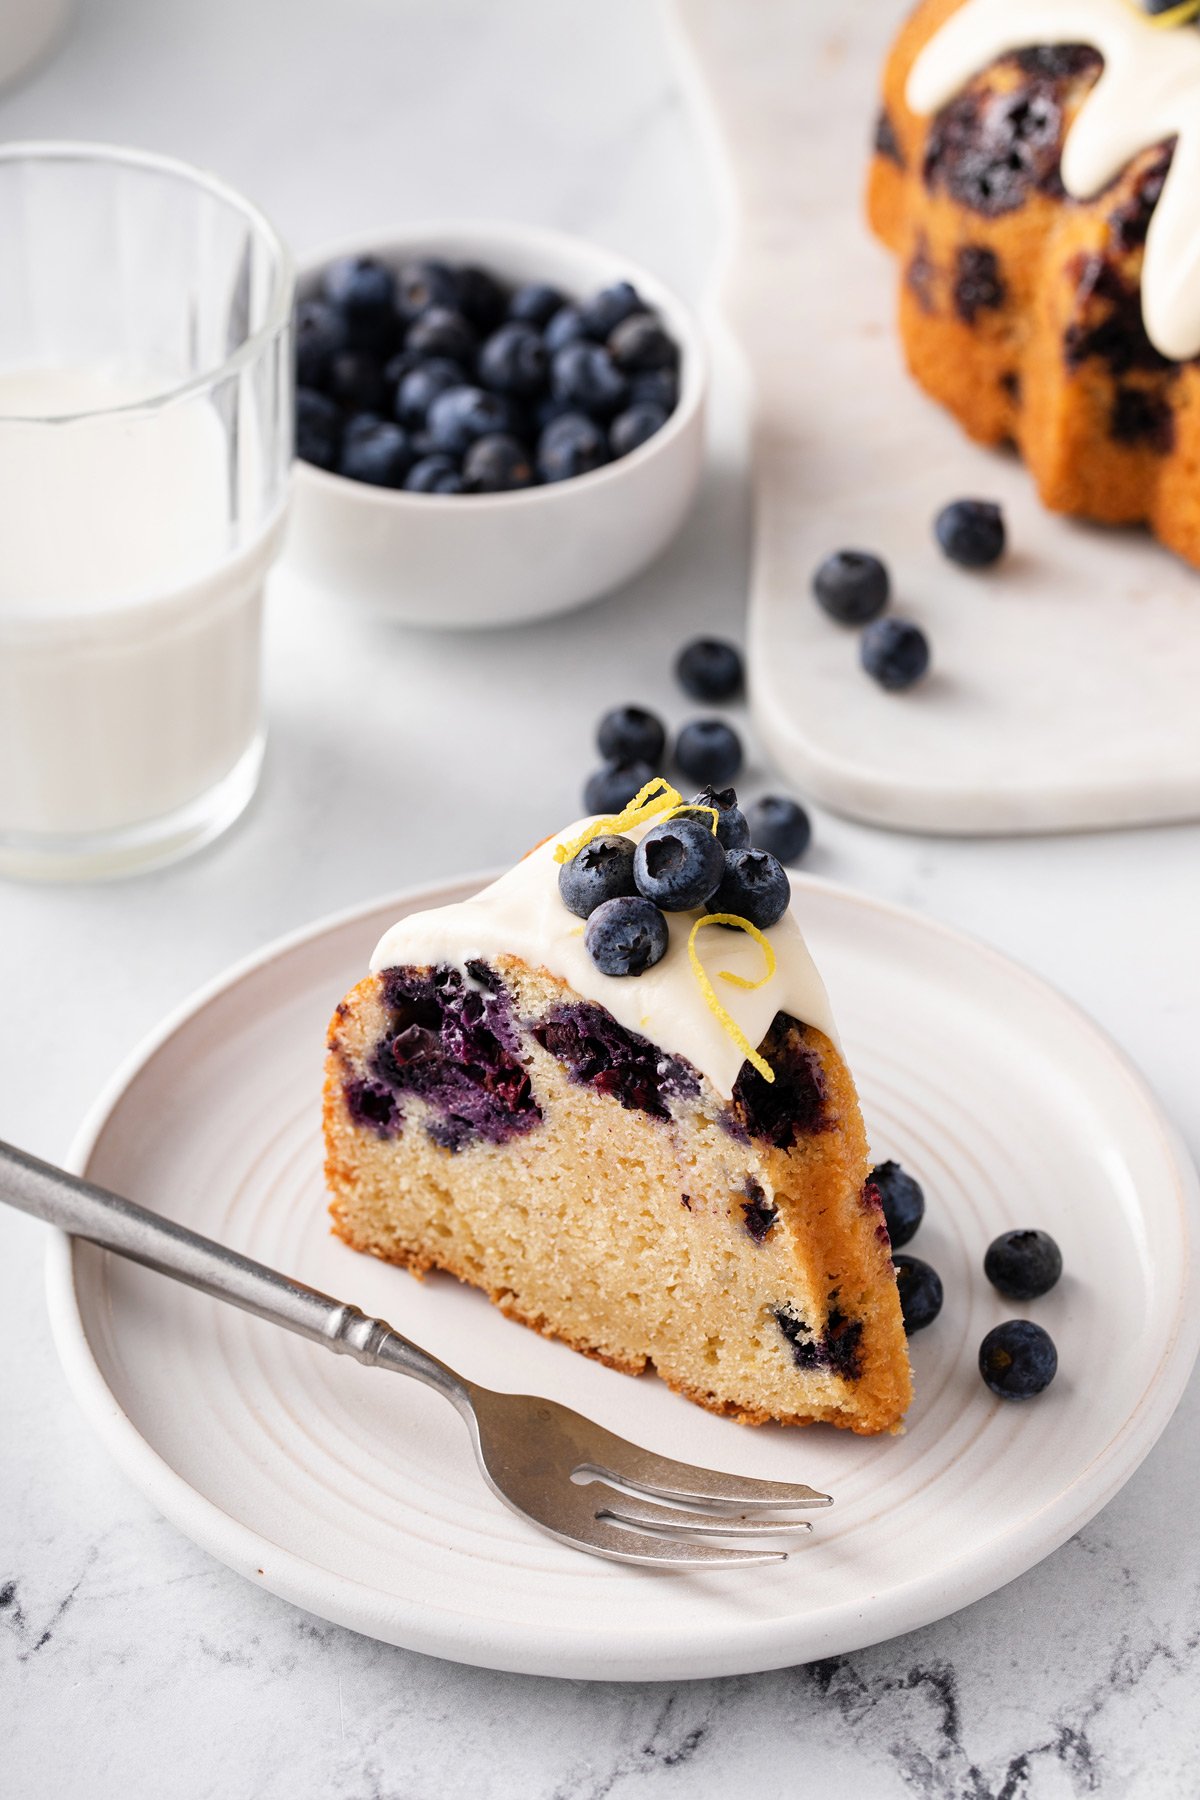 Slice of lemon-blueberry bundt cake topped with cream cheese glaze and whole blueberries set next to a fork on a white plate.